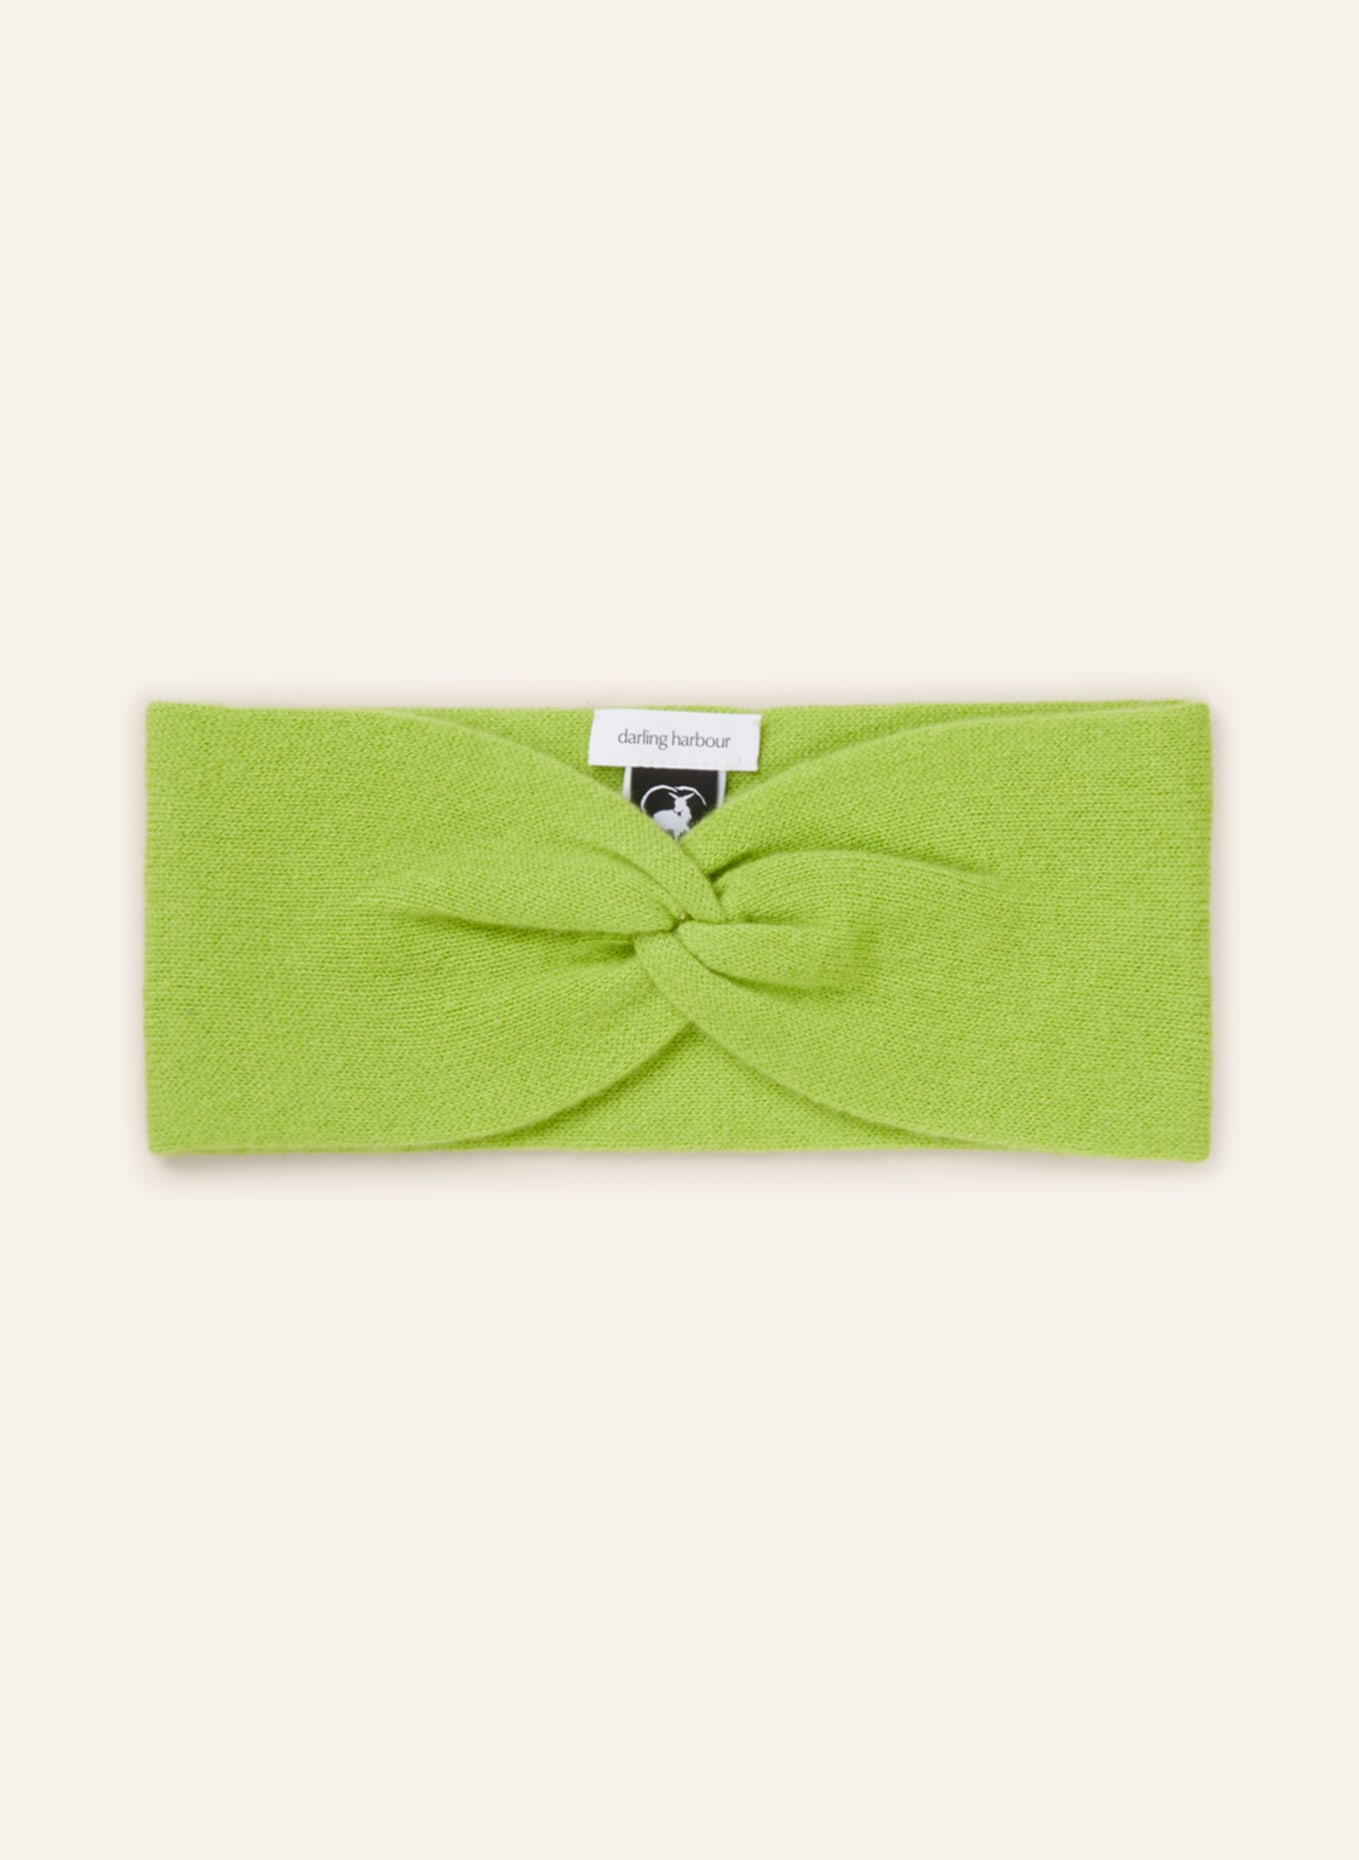 darling harbour Headband in cashmere, Color: LIGHT GREEN (Image 1)